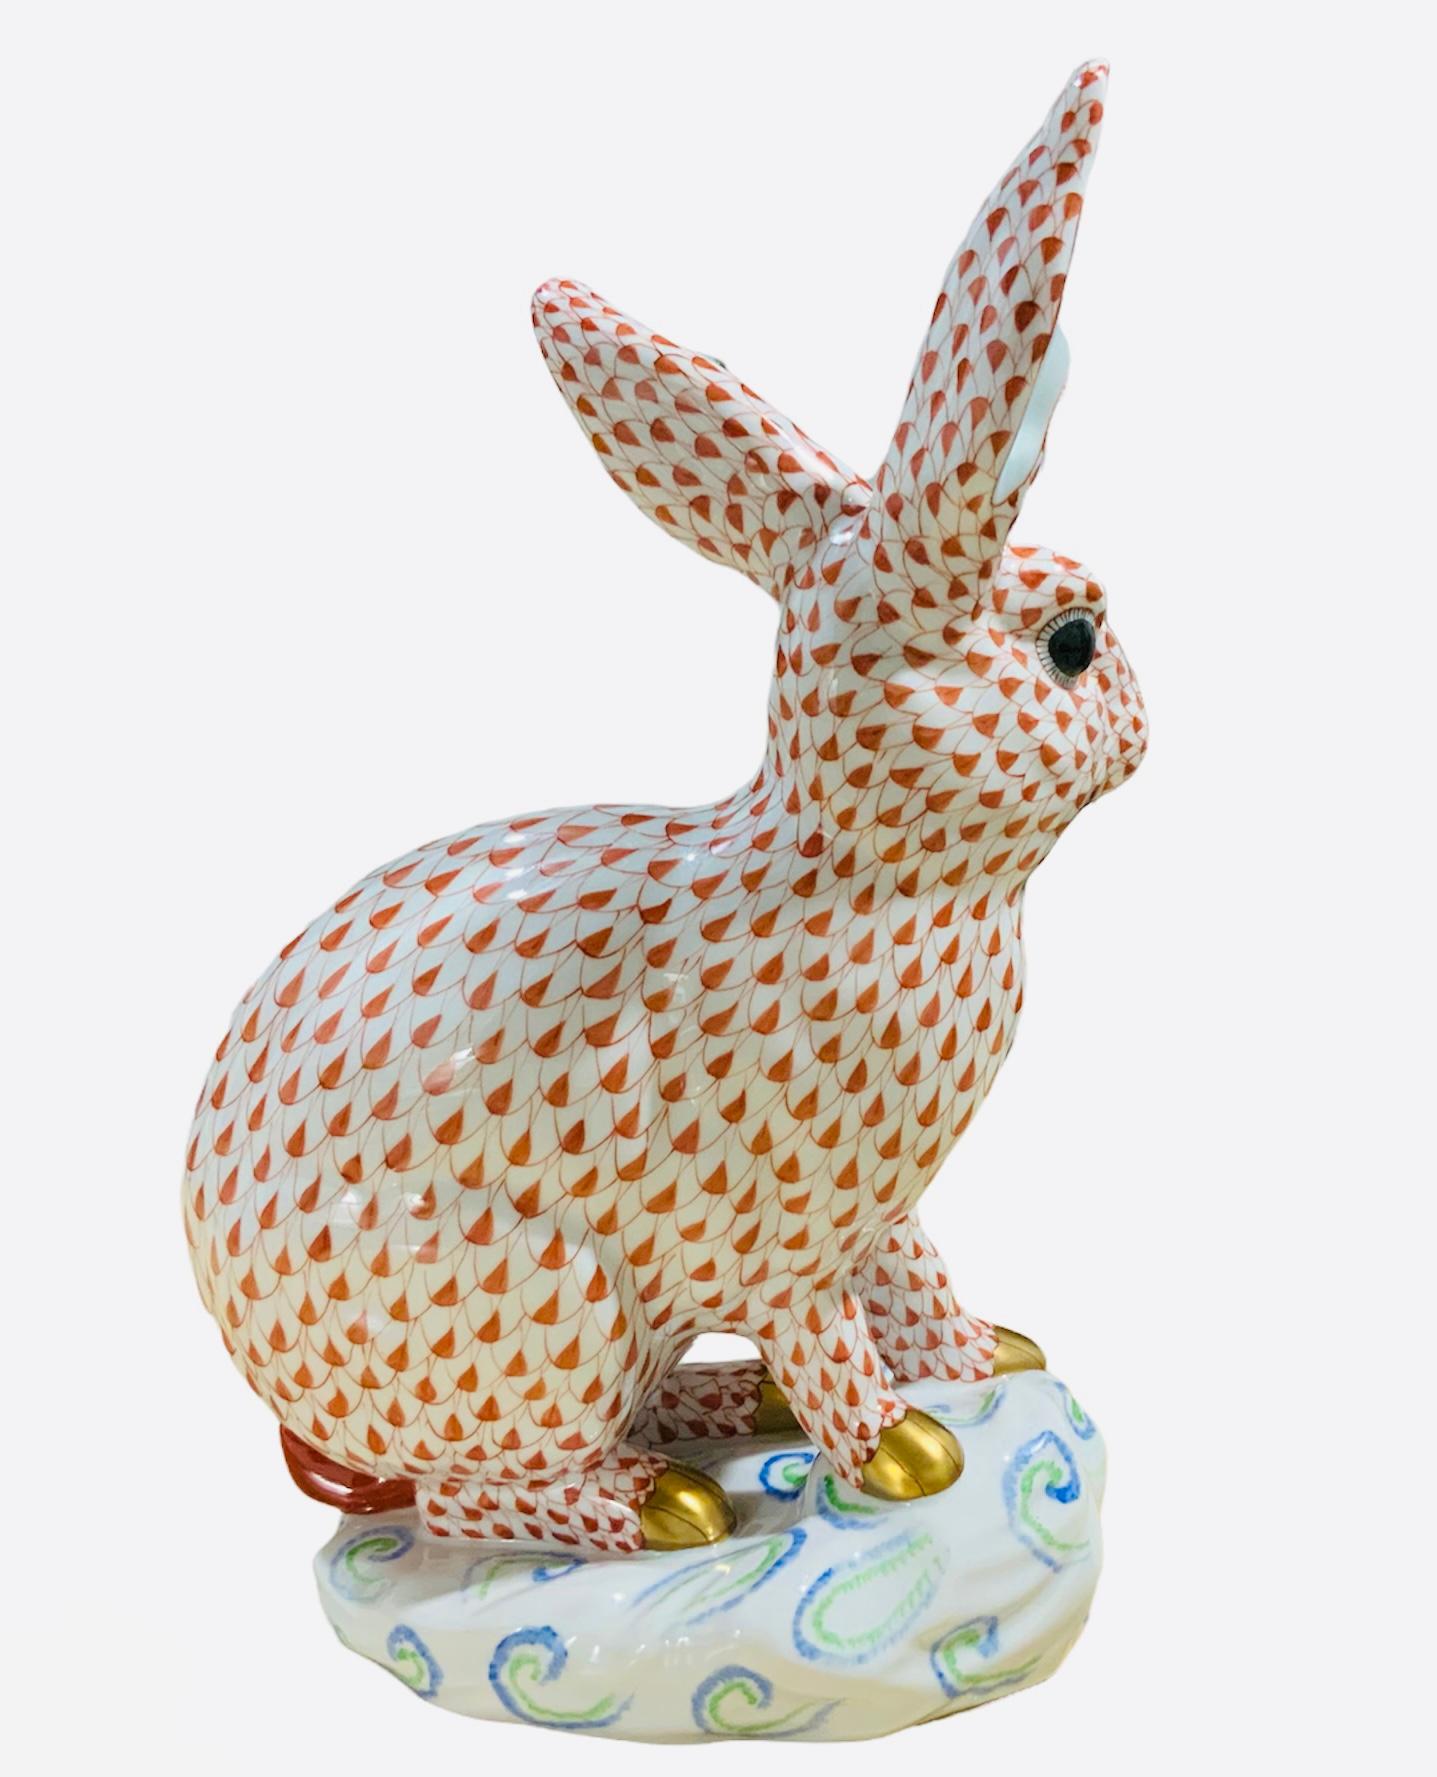 This is a Herend porcelain hand painted large rabbit that is sitting up above an asymmetrical oval white rock decorated with blue and green C-scrolls. Its background is white with orange fish scale net pattern. The inside of the ears are light green